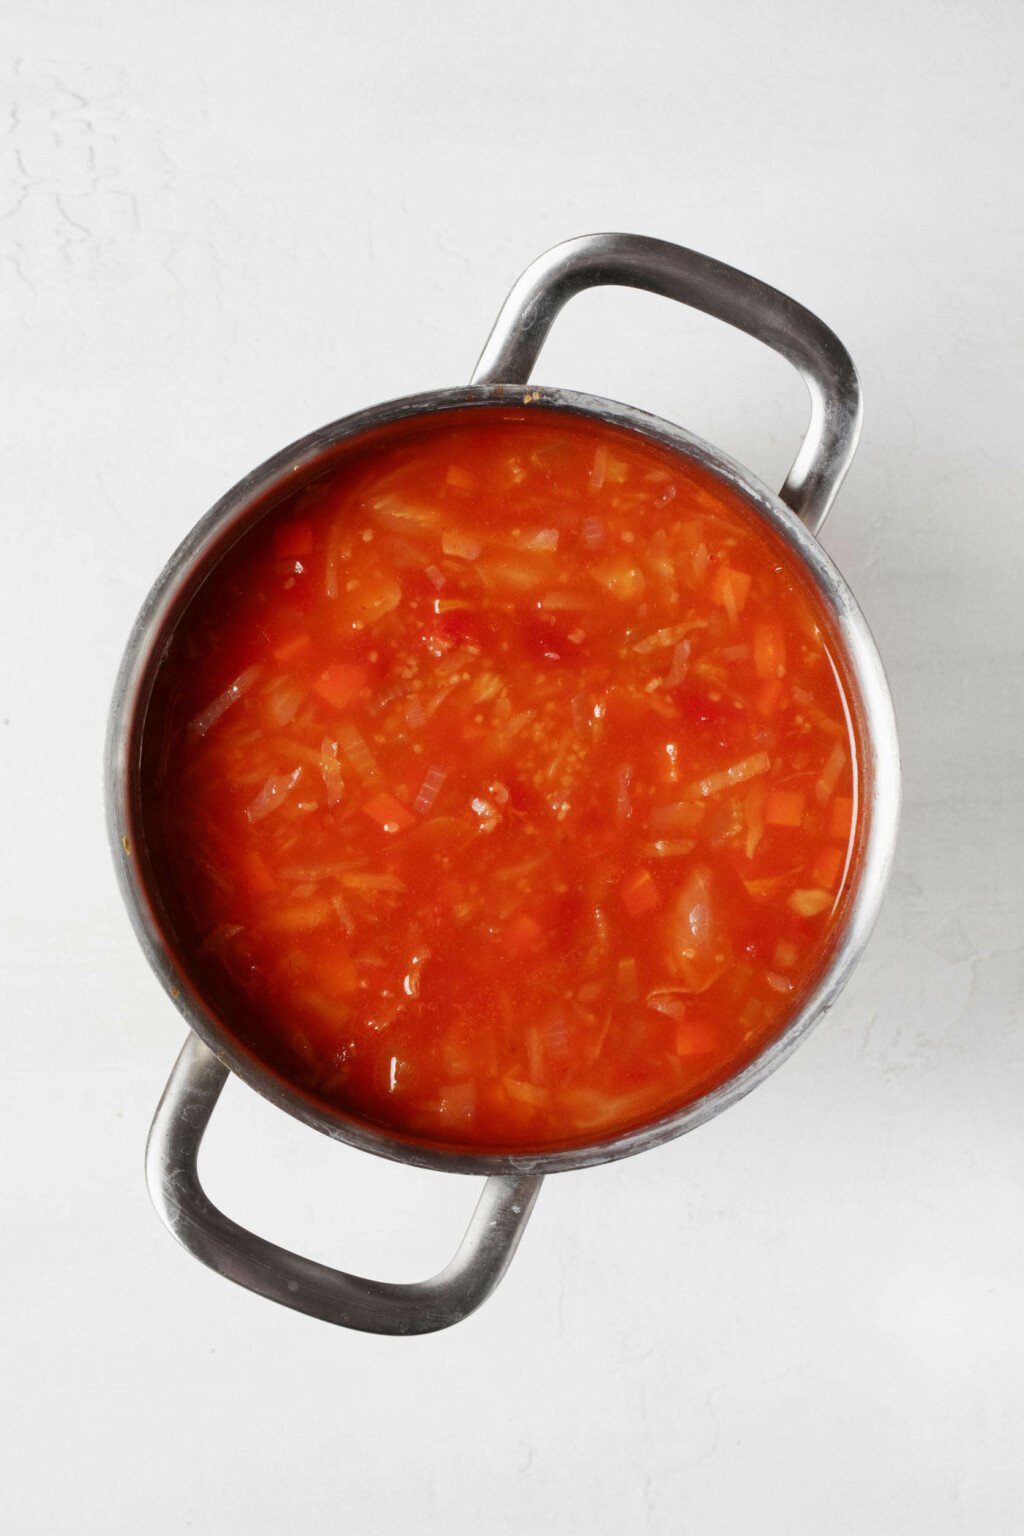 An overhead image of a silver pot, which is filled with a cabbage, bulgur, and tomato stew.